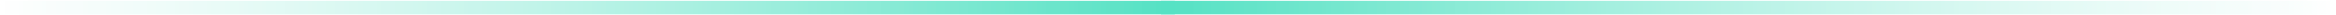 line turquoise.png